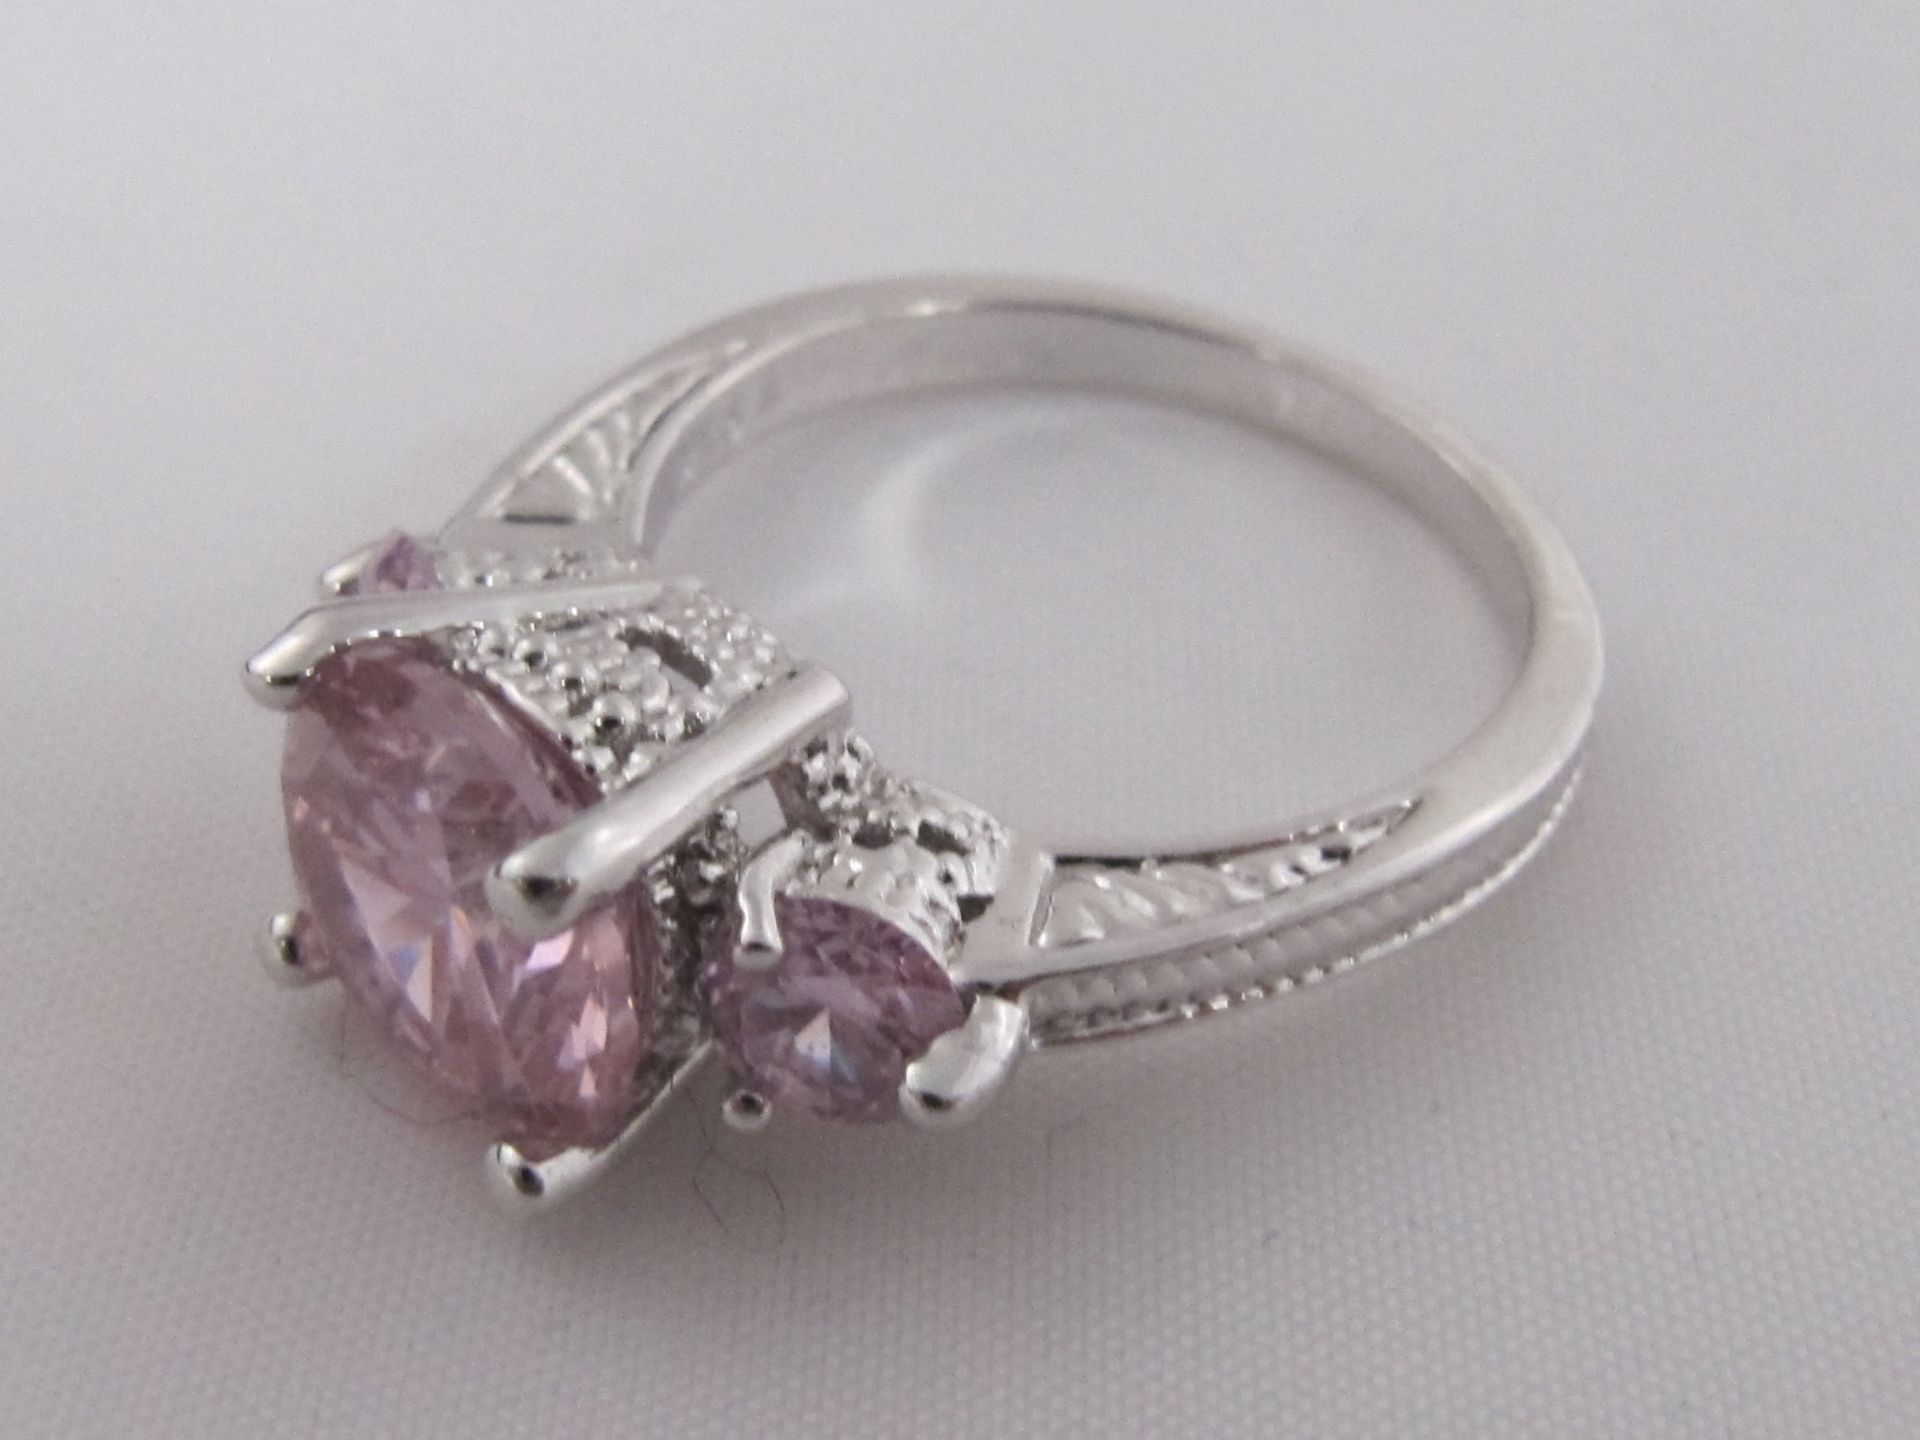 10k White Gold Filled with Pink Sapphires. Size R.